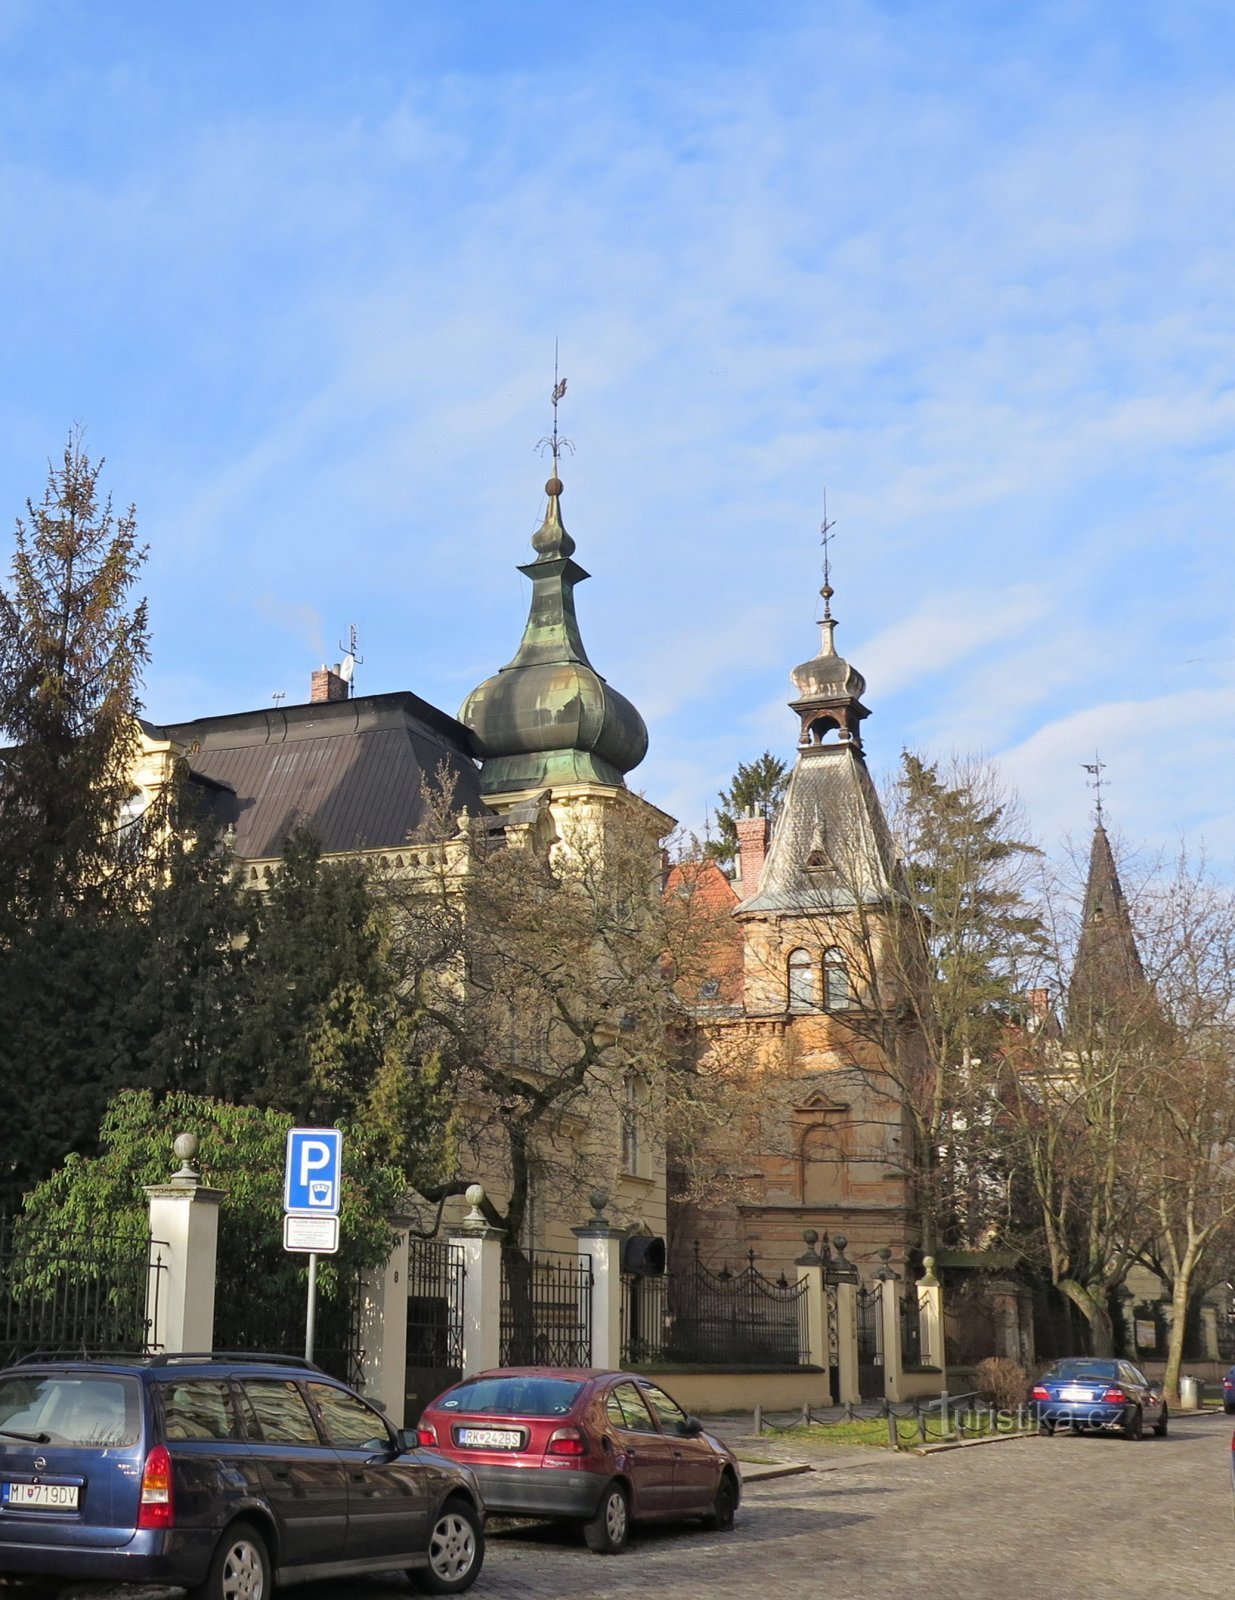 the tower-shaped facade of the villas on Wienská Street (Hans Passinger's villa is the first from the left)